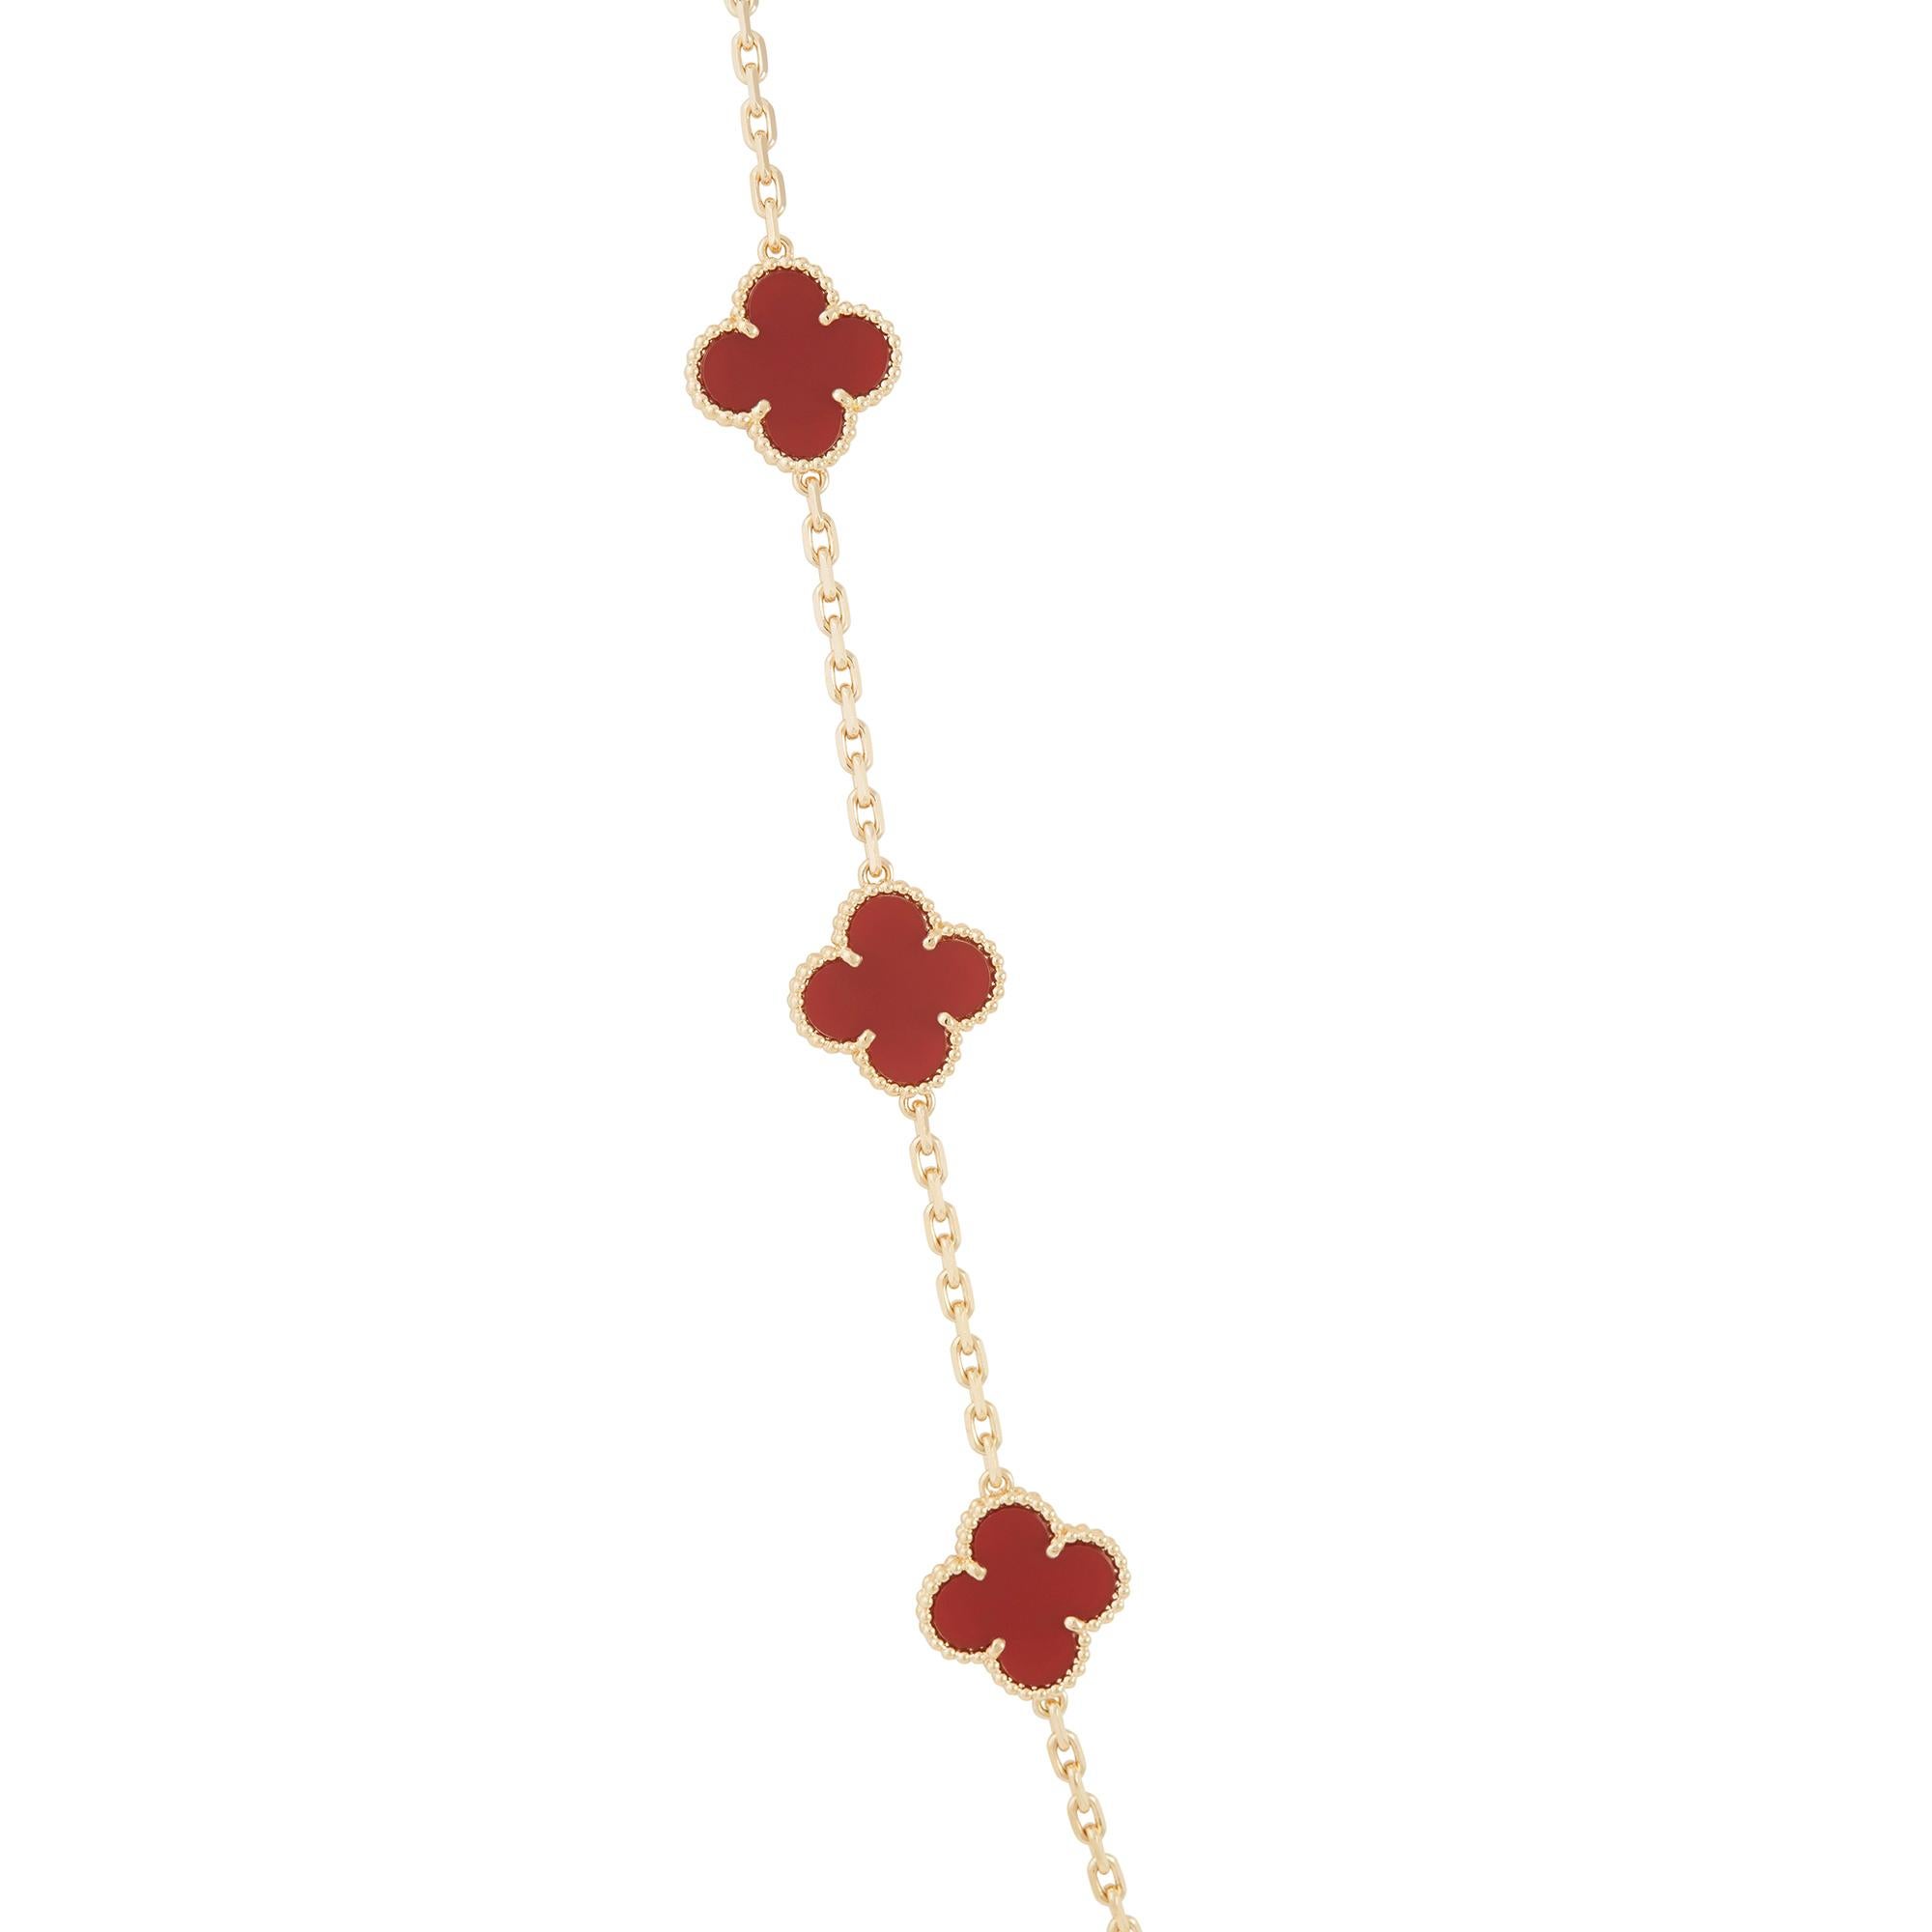 Authentic Van Cleef & Arpels 18 karat yellow gold long necklace featuring 20 clover leaf inspired motifs set with carved carnelian stones. The Necklace measures 33 1/2 inches in length. Signed VCA, Au750 with serial number and hallmarks.  Necklace